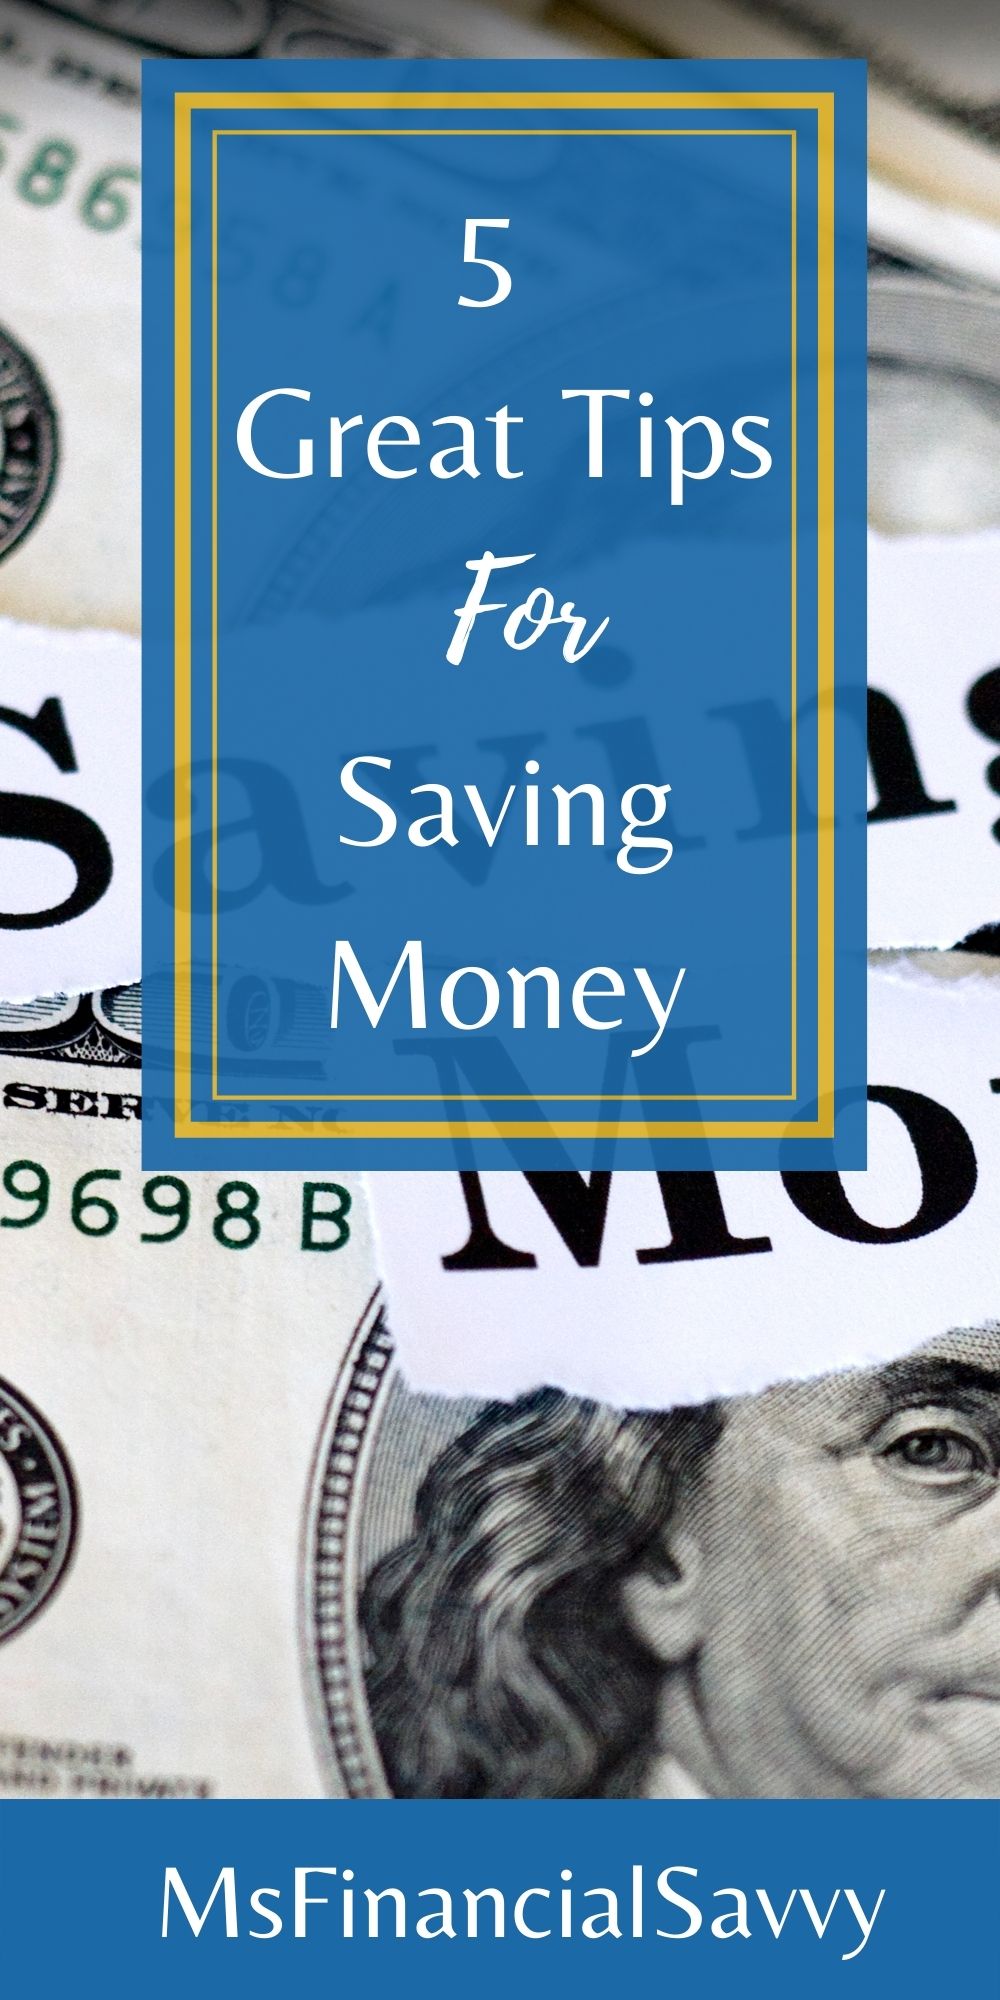 5 Great Tips for Saving Money